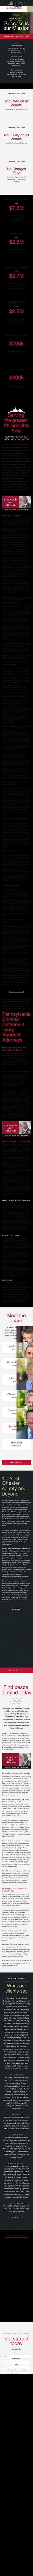 Ciccarelli Law Offices - West Chester PA Lawyers